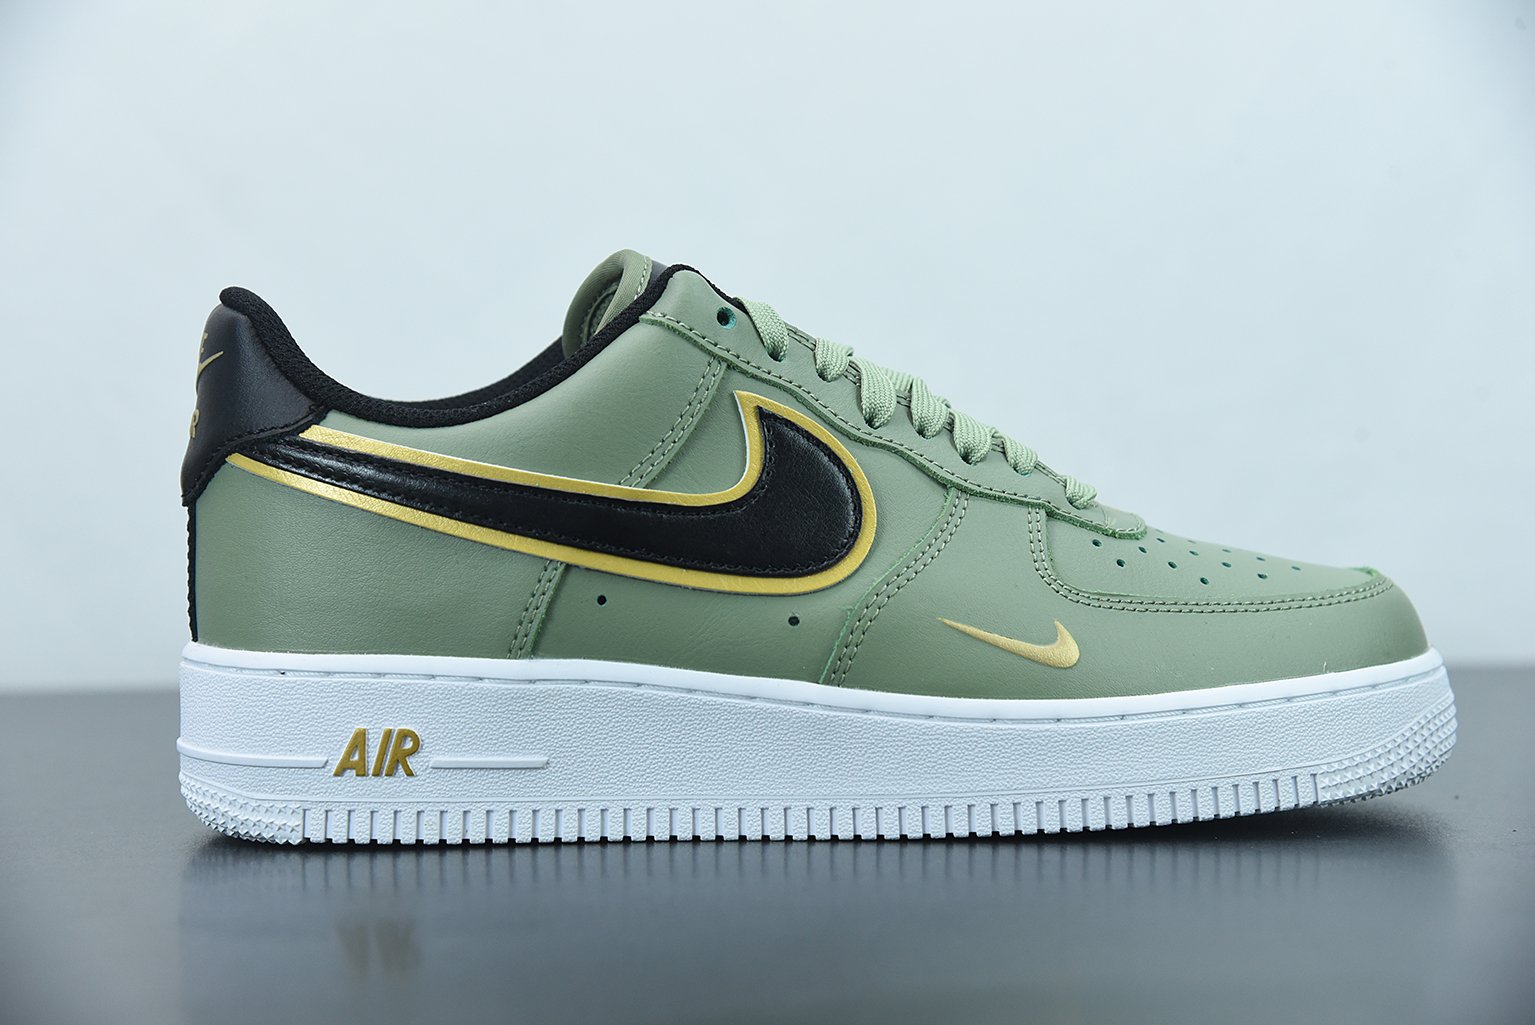 Air Force 1 Low '07 LV8 Double Swoosh Olive Gold Black DA8481-300 ...